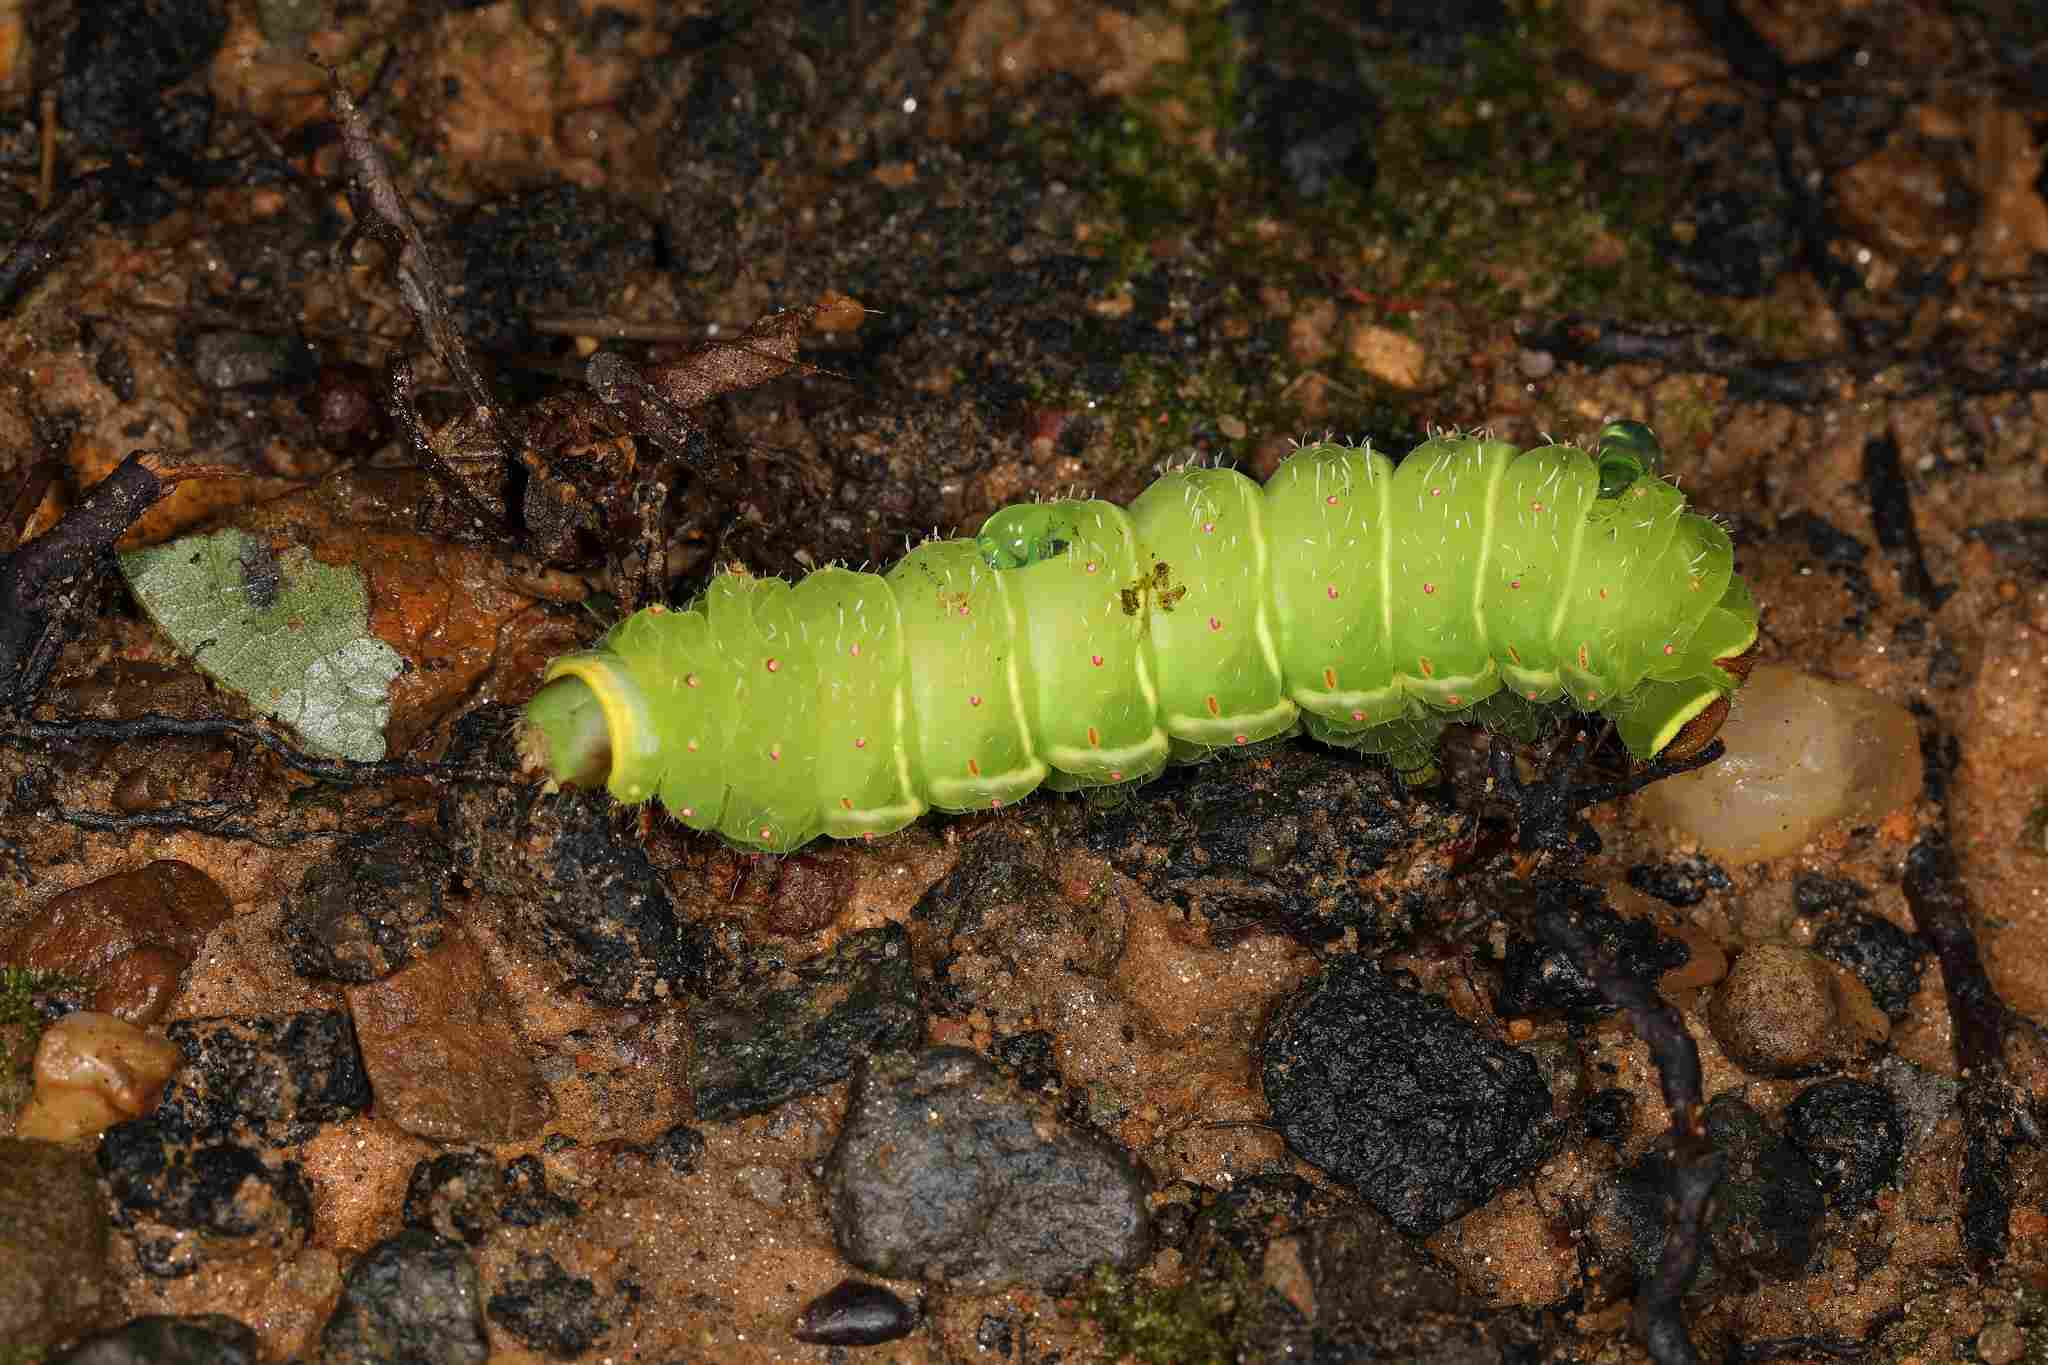 Is a Caterpillar a Consumer: Caterpillars Can Act as Detritivores and Scavengers (Credit: Judy Gallagher 2020 .CC BY 2.0.)